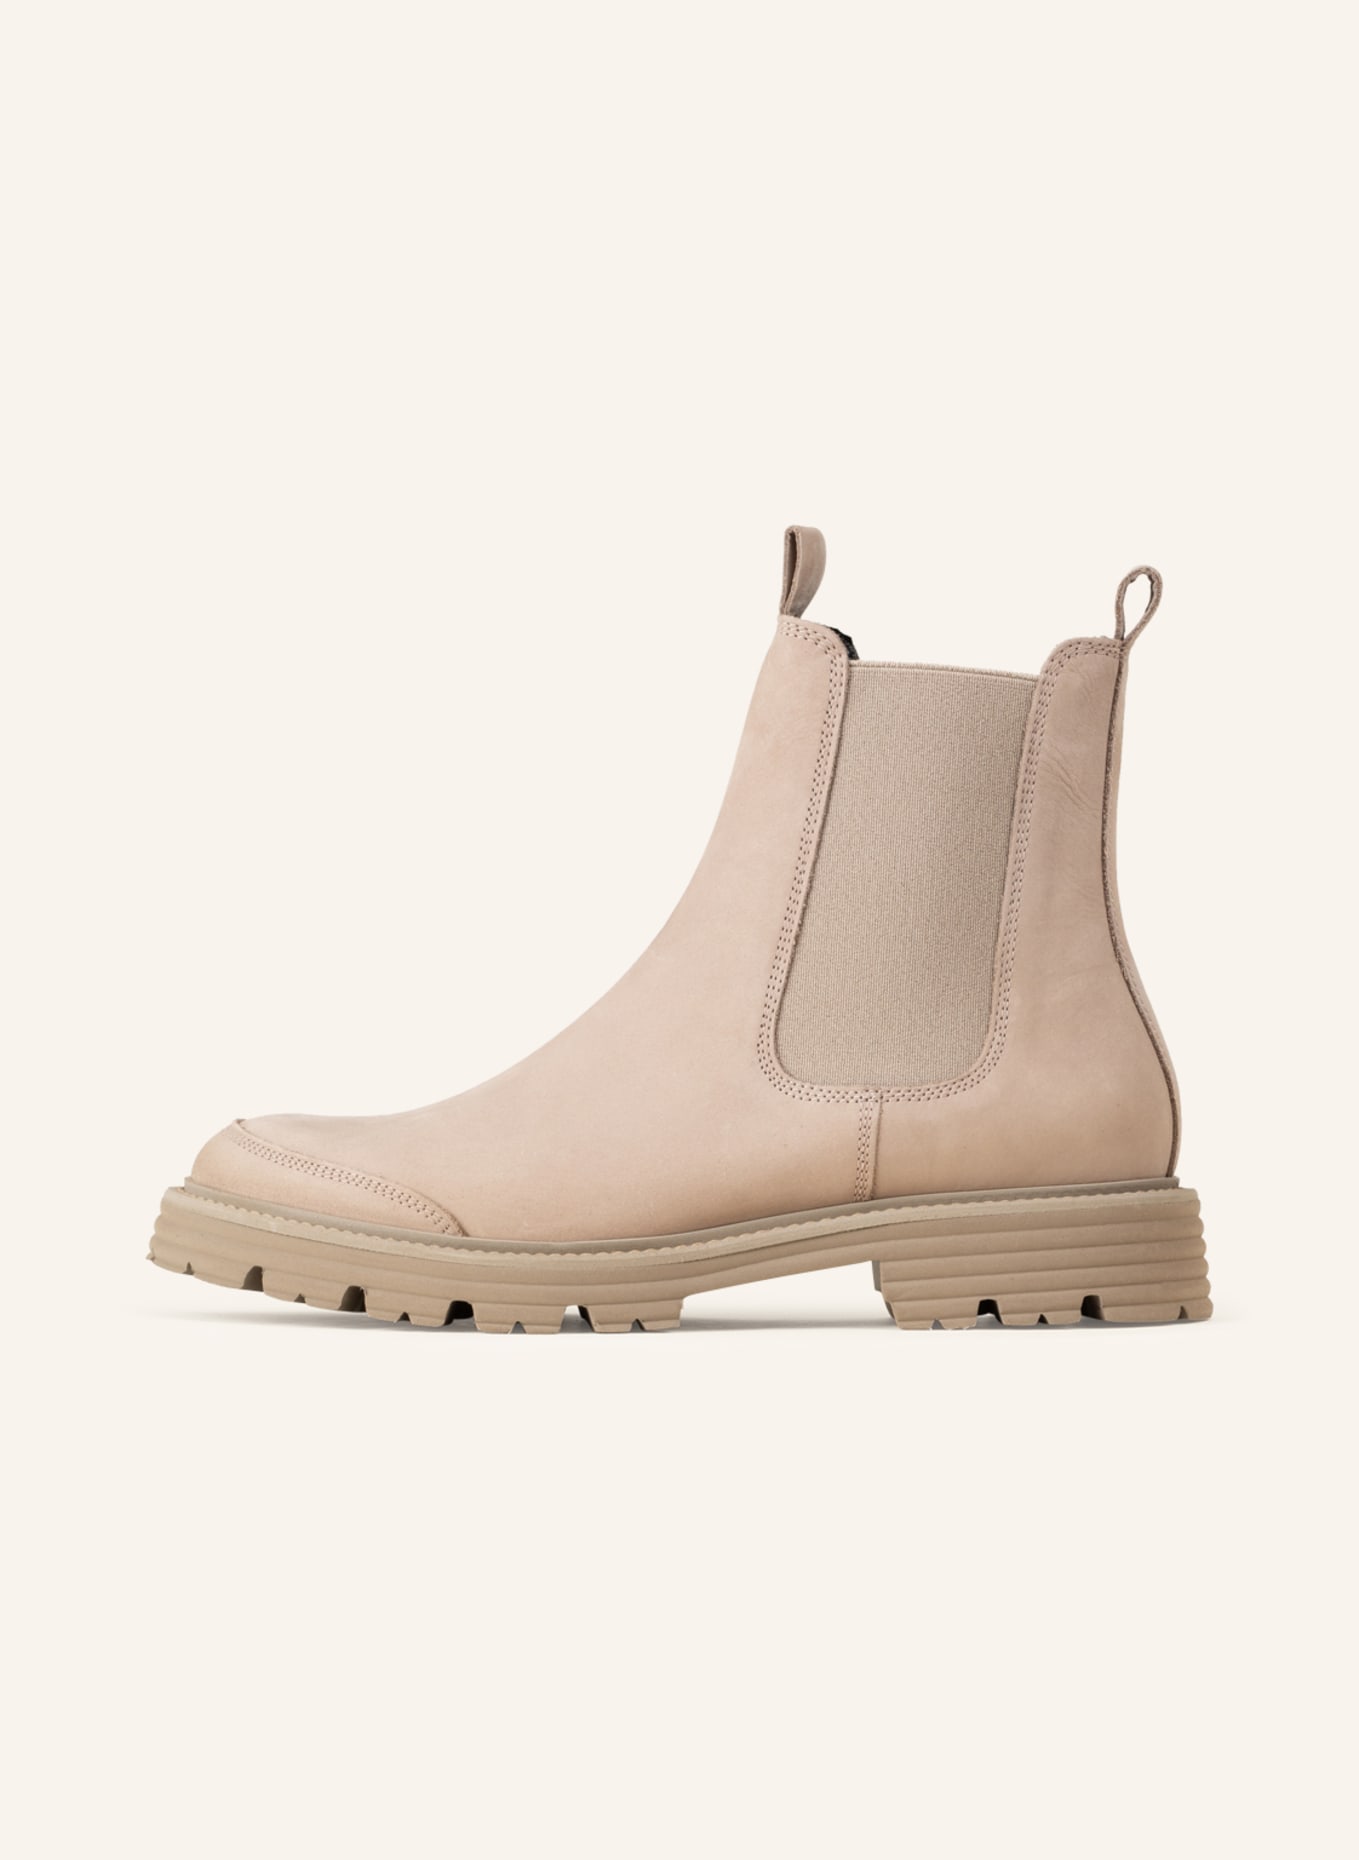 KENNEL & SCHMENGER Chelsea-Boots POWER, Farbe: TAUPE (Bild 4)